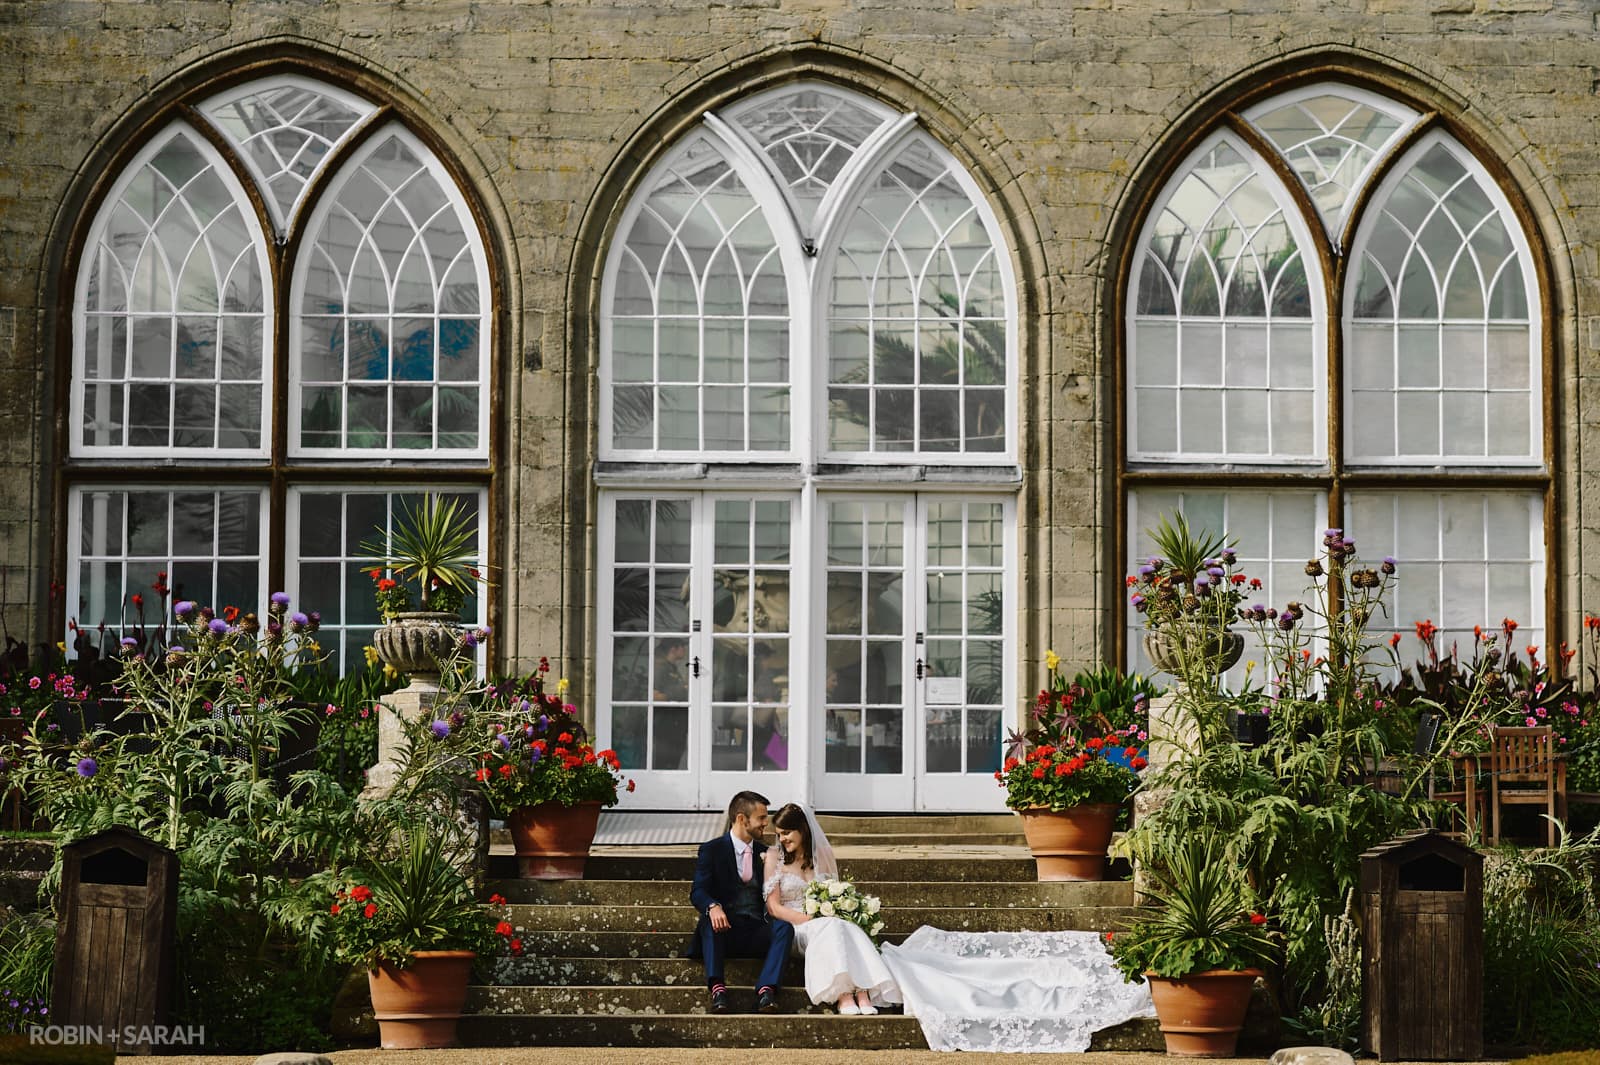 Bride and groom sit on steps in front of The Conservatory building at Warwick Castle